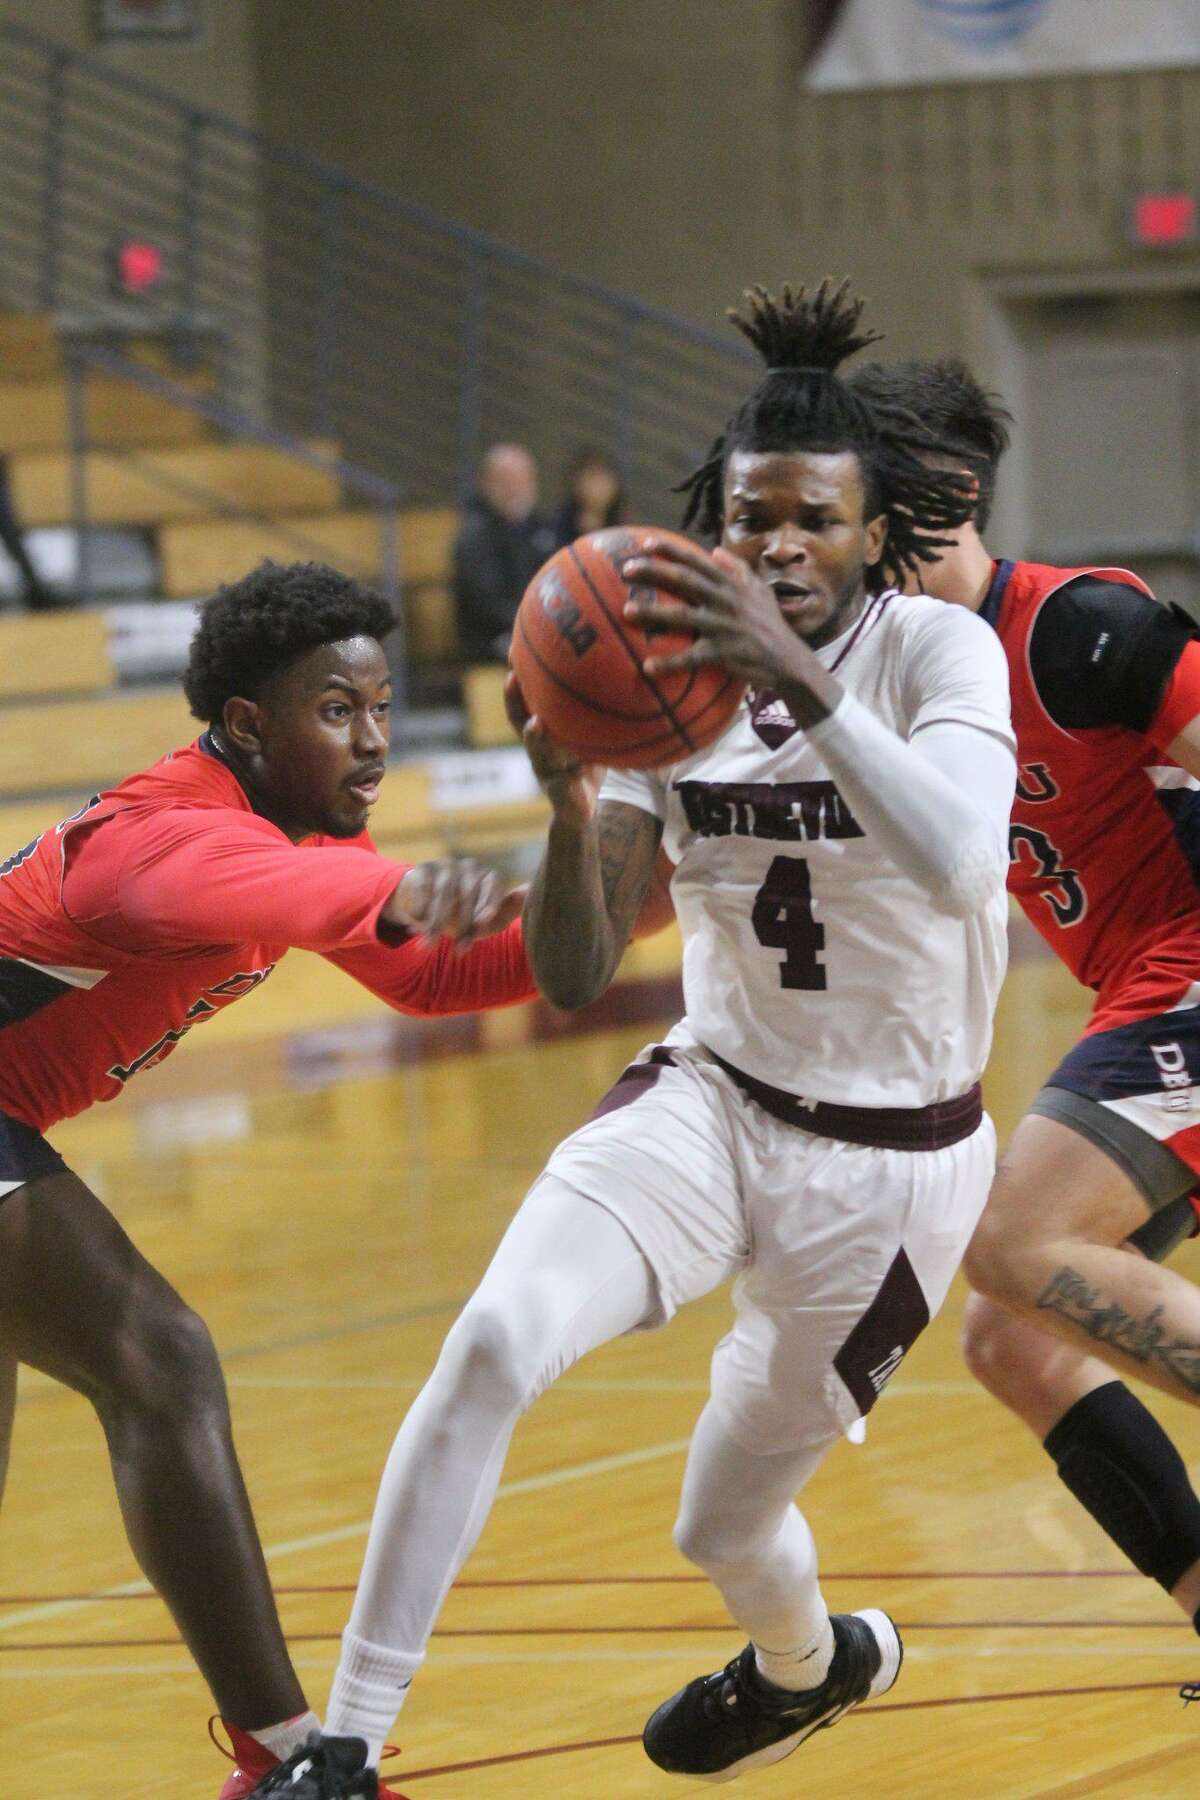 Greg Bowie II scored 19 points in Texas A&M International’s loss to Dallas Baptist on Thursday.